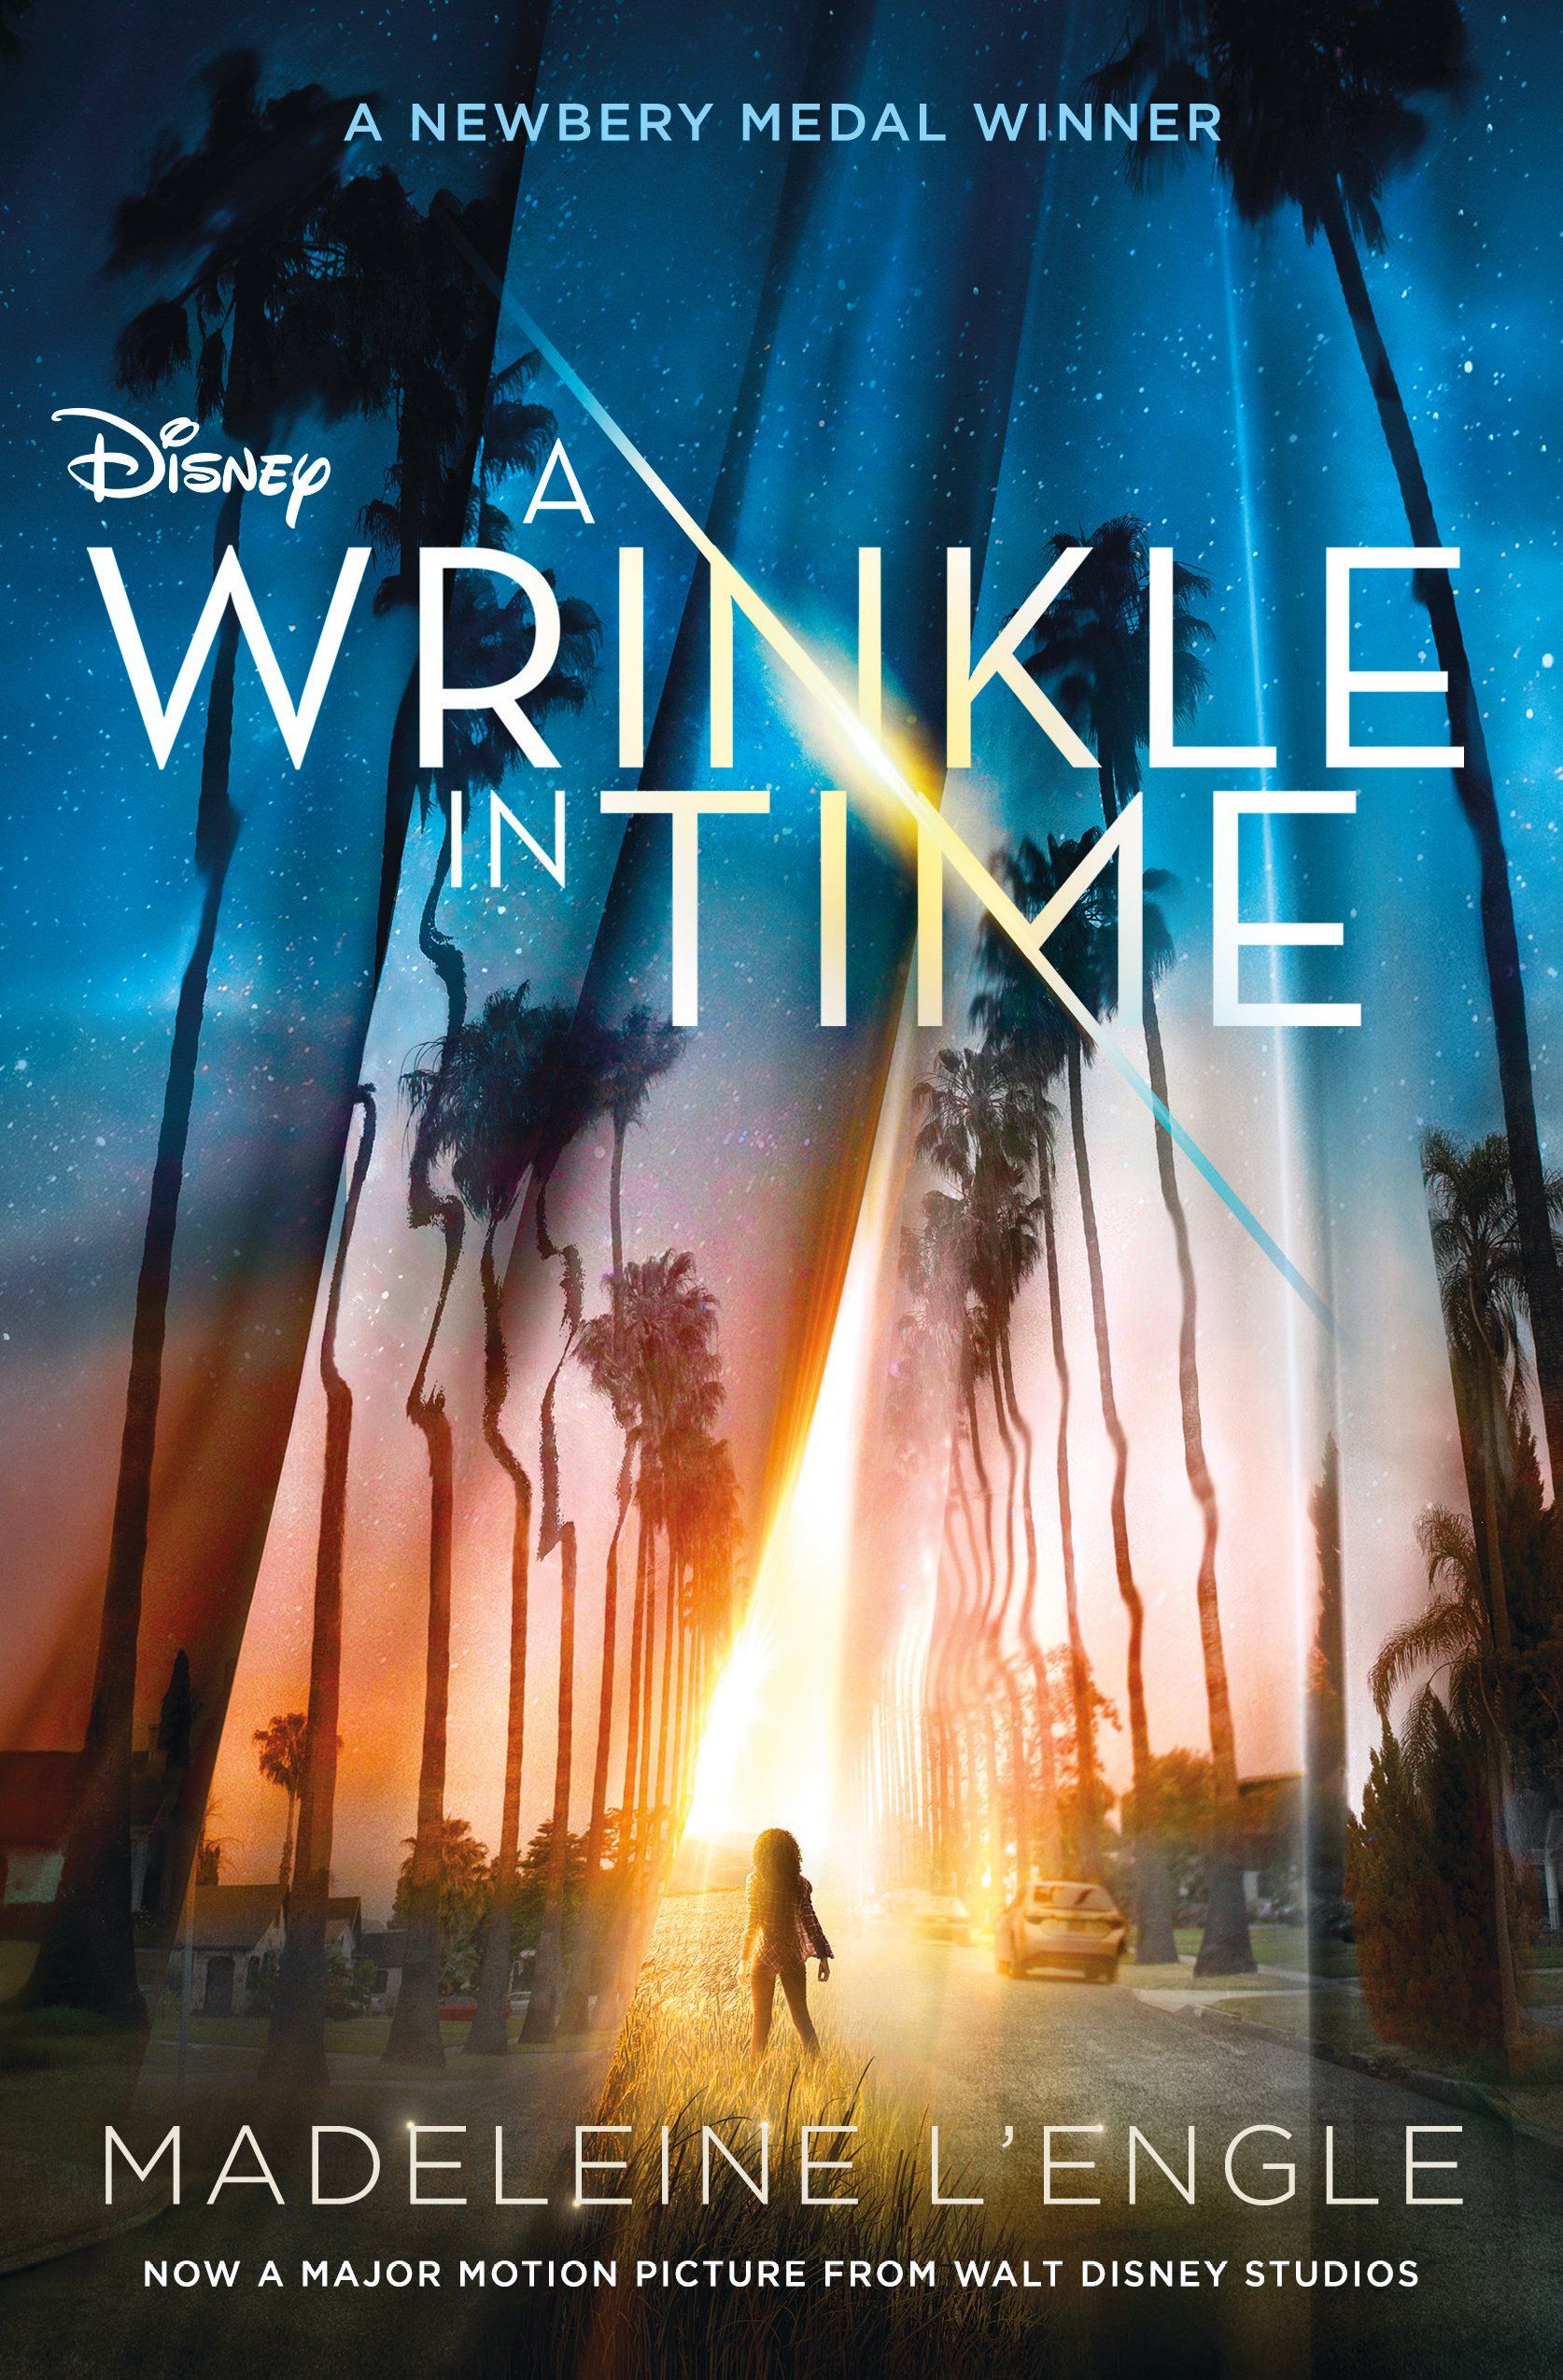 <p><b>Film Adaptation: “A Wrinkle in Time” (2018)</b></p><p><b>Critic Quote:</b> “‘A Wrinkle in Time’ is wildly uneven, weirdly suspenseless and tonally all over the place, relying on wall-to-wall music to supply the missing emotional connection and trowel over huge plot holes.” — Variety</p><p>The film version of Madeleine L’Engle’s fantasy “A Wrinkle In Time” rushes through the story and doesn’t spend enough time developing characters and the plot, jumping from scene to scene too quickly. The film is overdone to the point of tackiness and the theme of the story becomes muddled with all of the background noise despite Oprah Winfrey as Mrs. Which and lush special effects. </p>